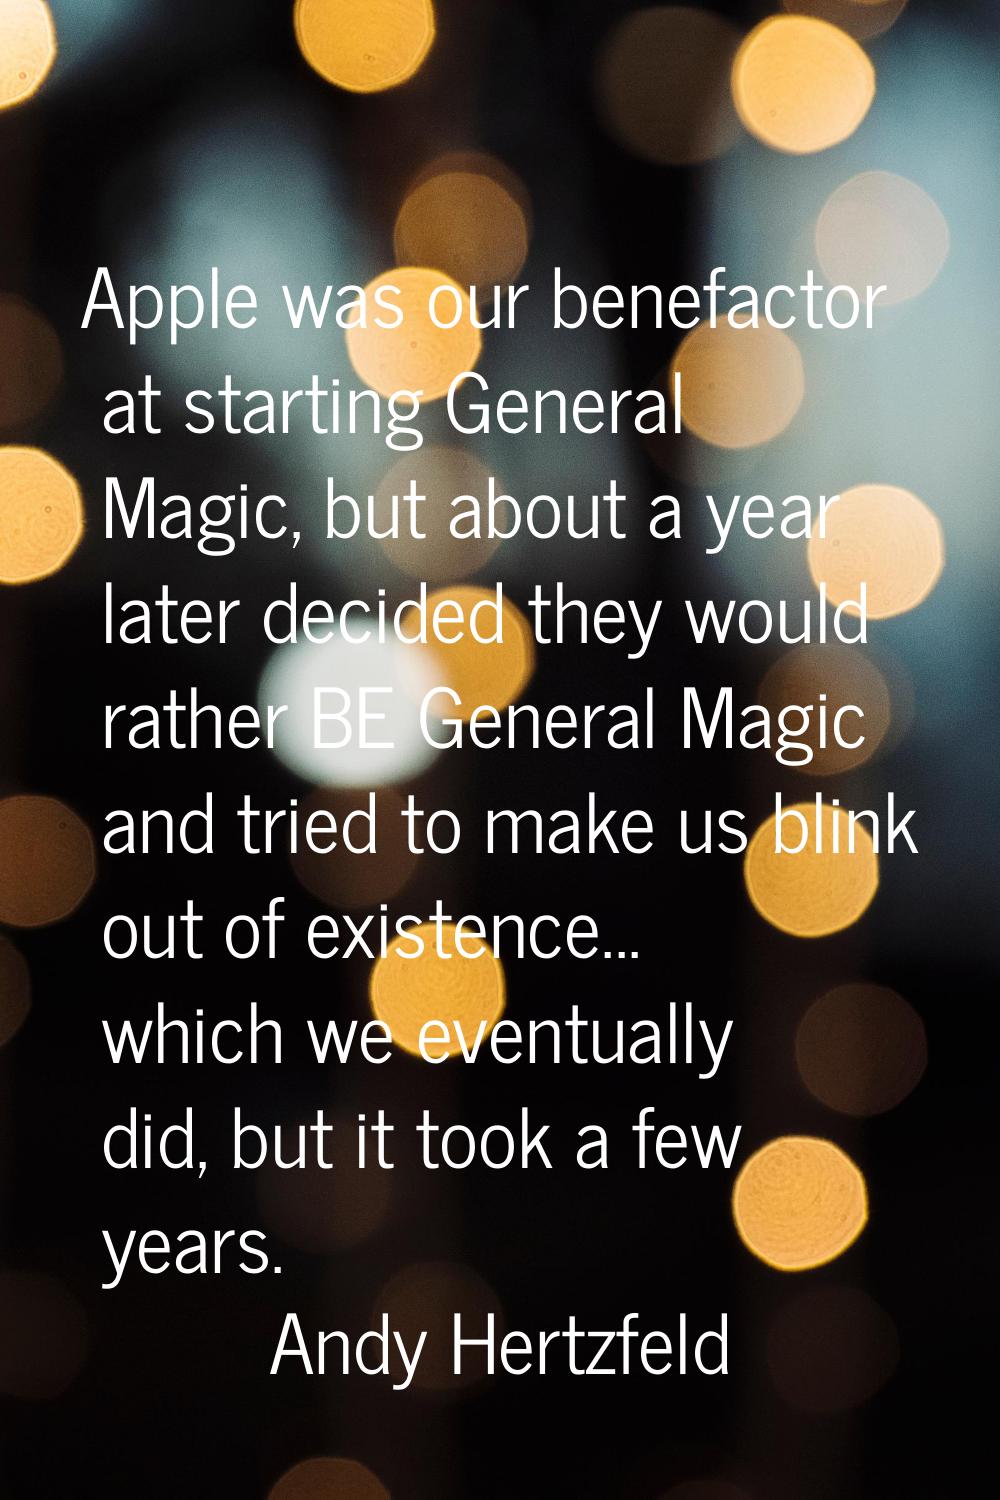 Apple was our benefactor at starting General Magic, but about a year later decided they would rathe